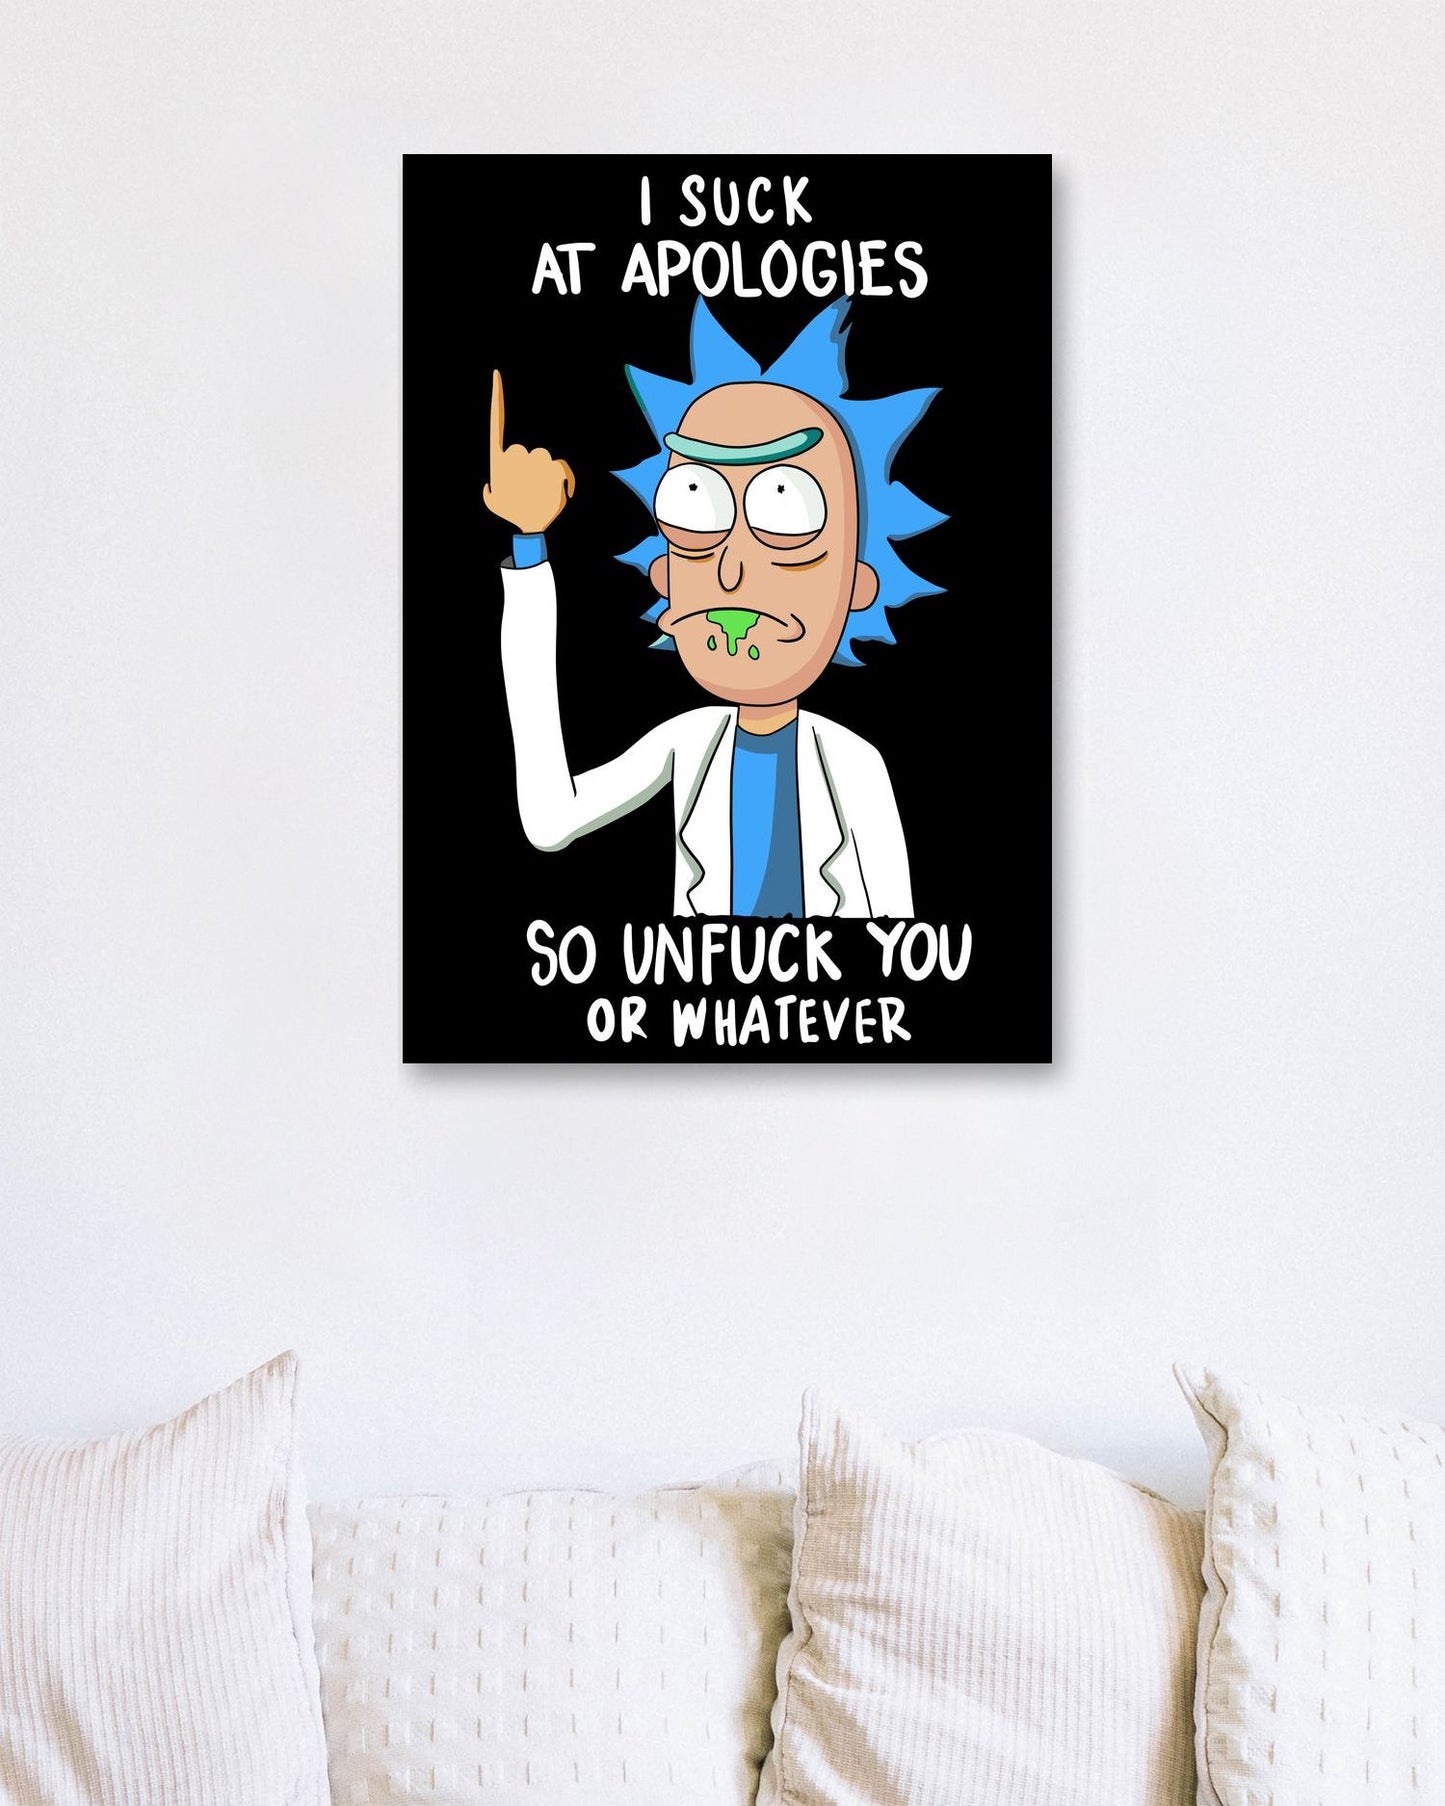 Rick and morty quotes 7 - @Yoho